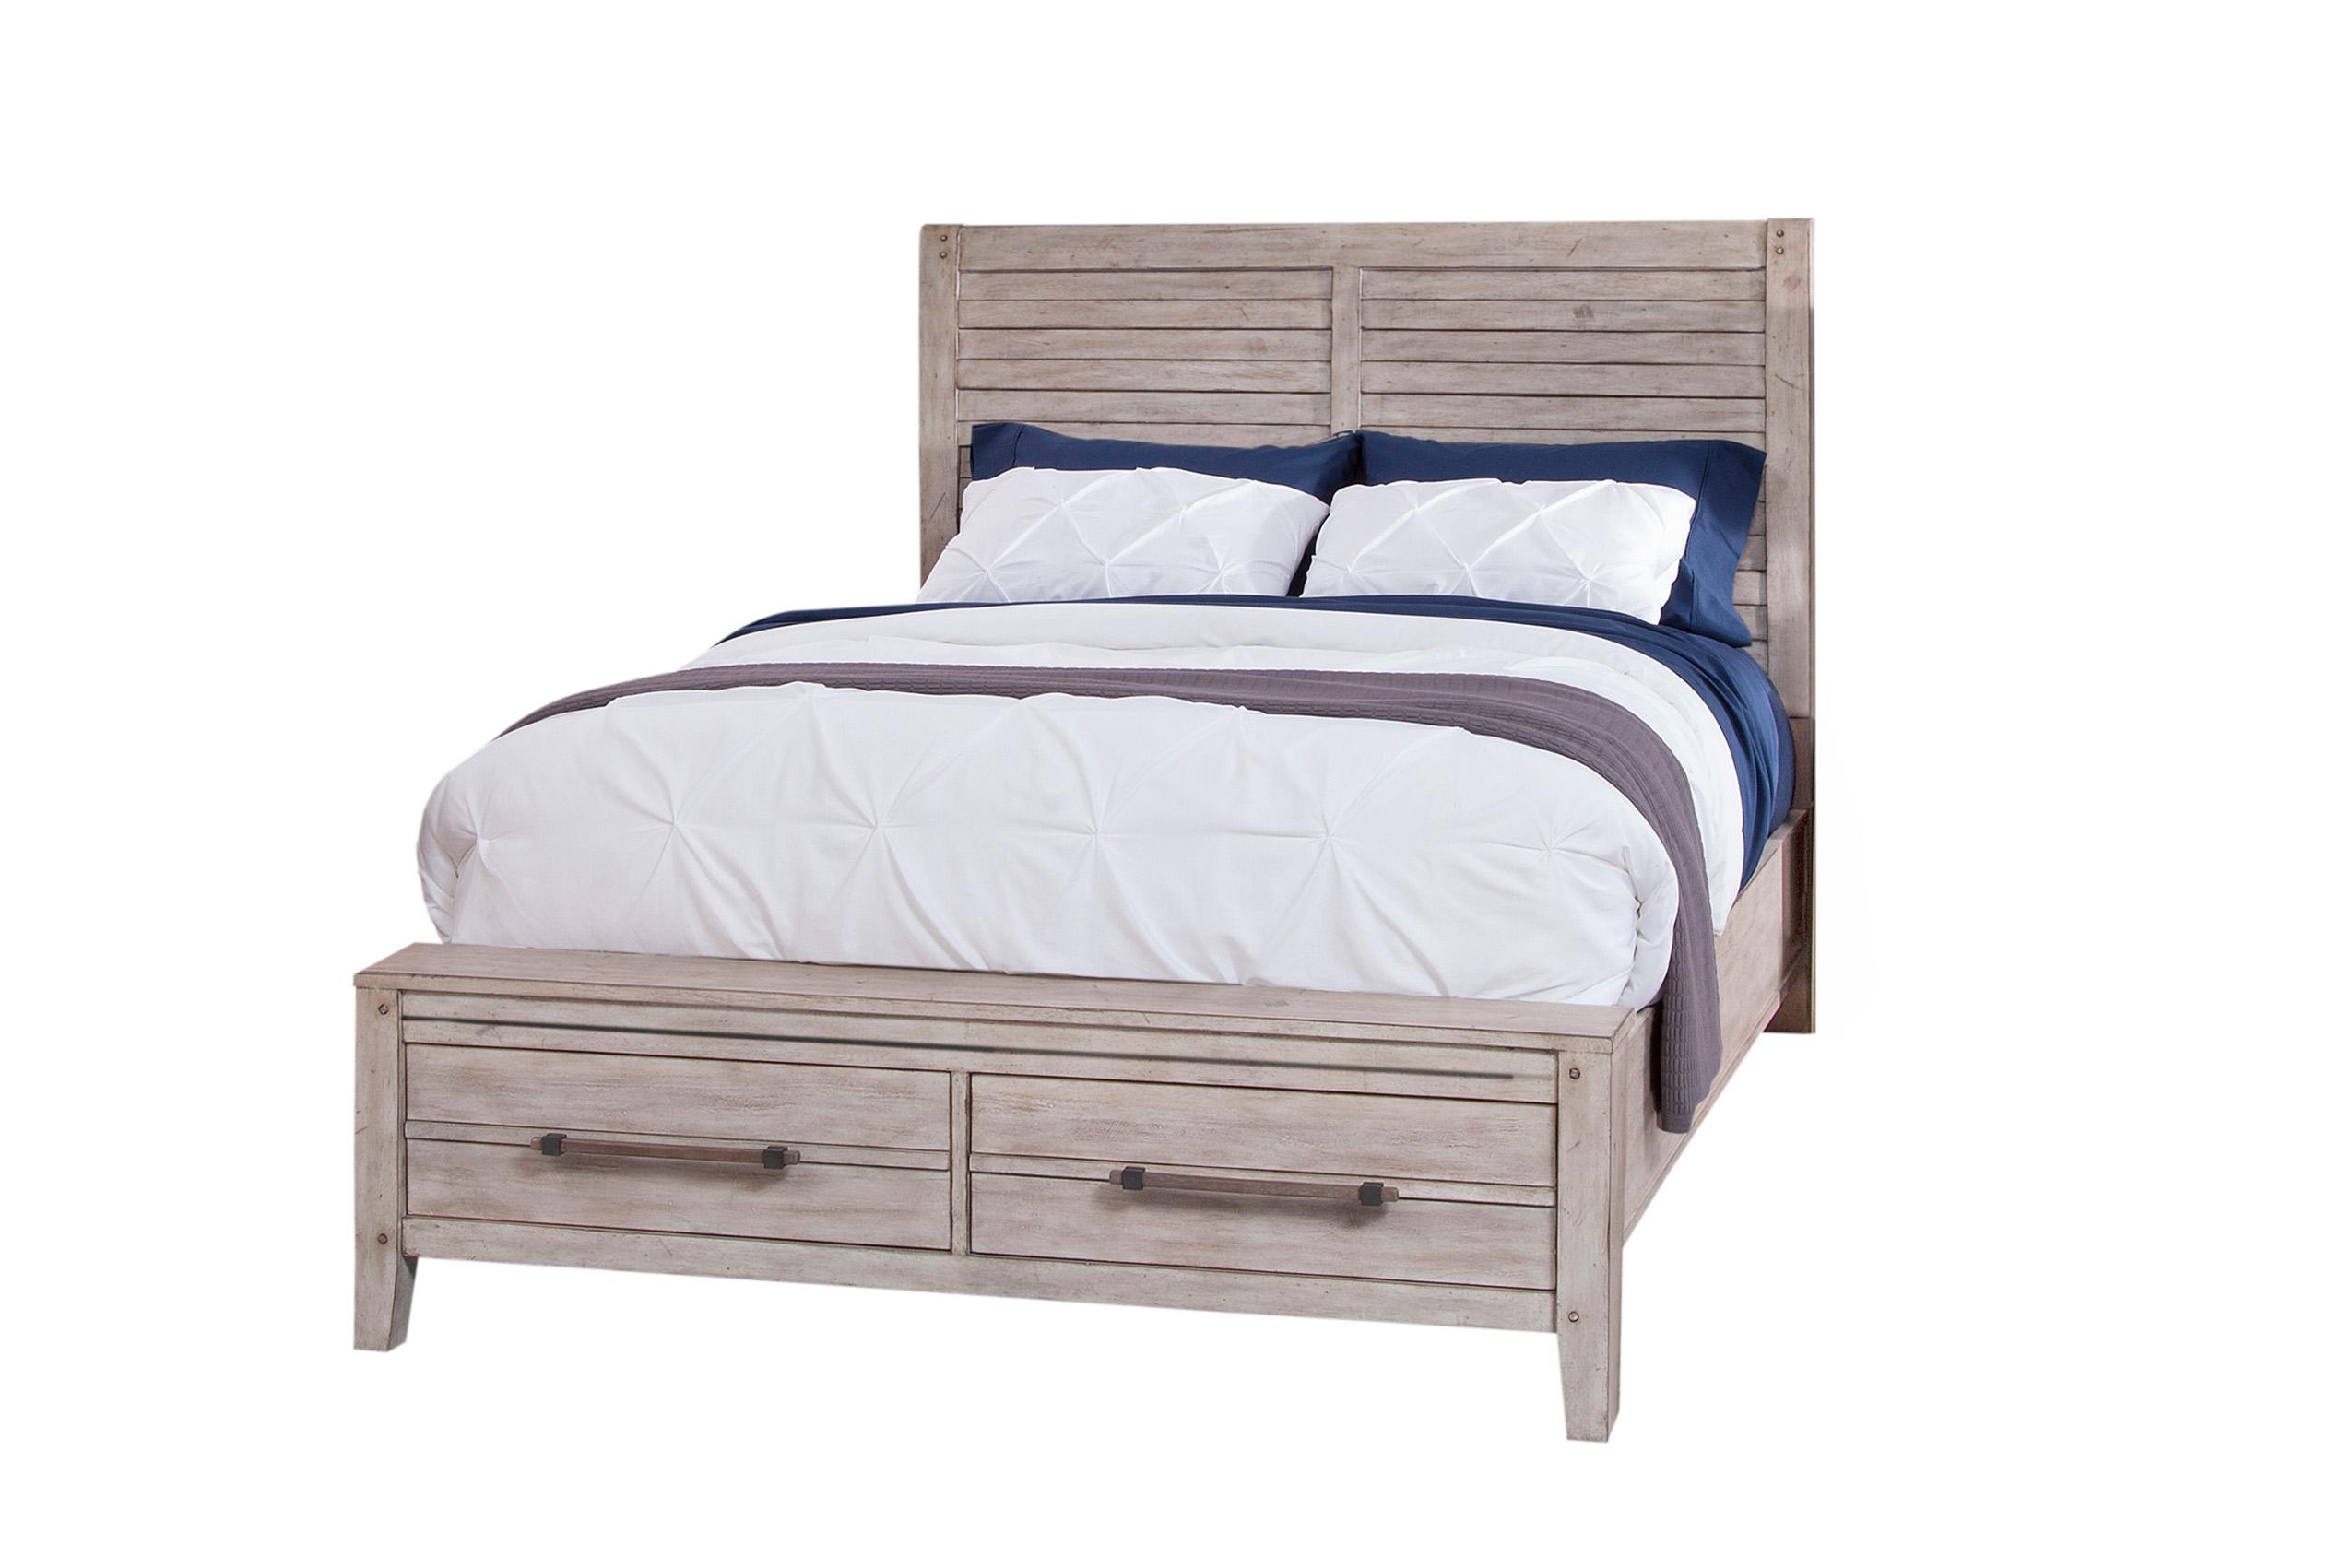 Classic, Traditional Panel Bed AURORA 2810-50PSB 2810-50PNST in whitewash 